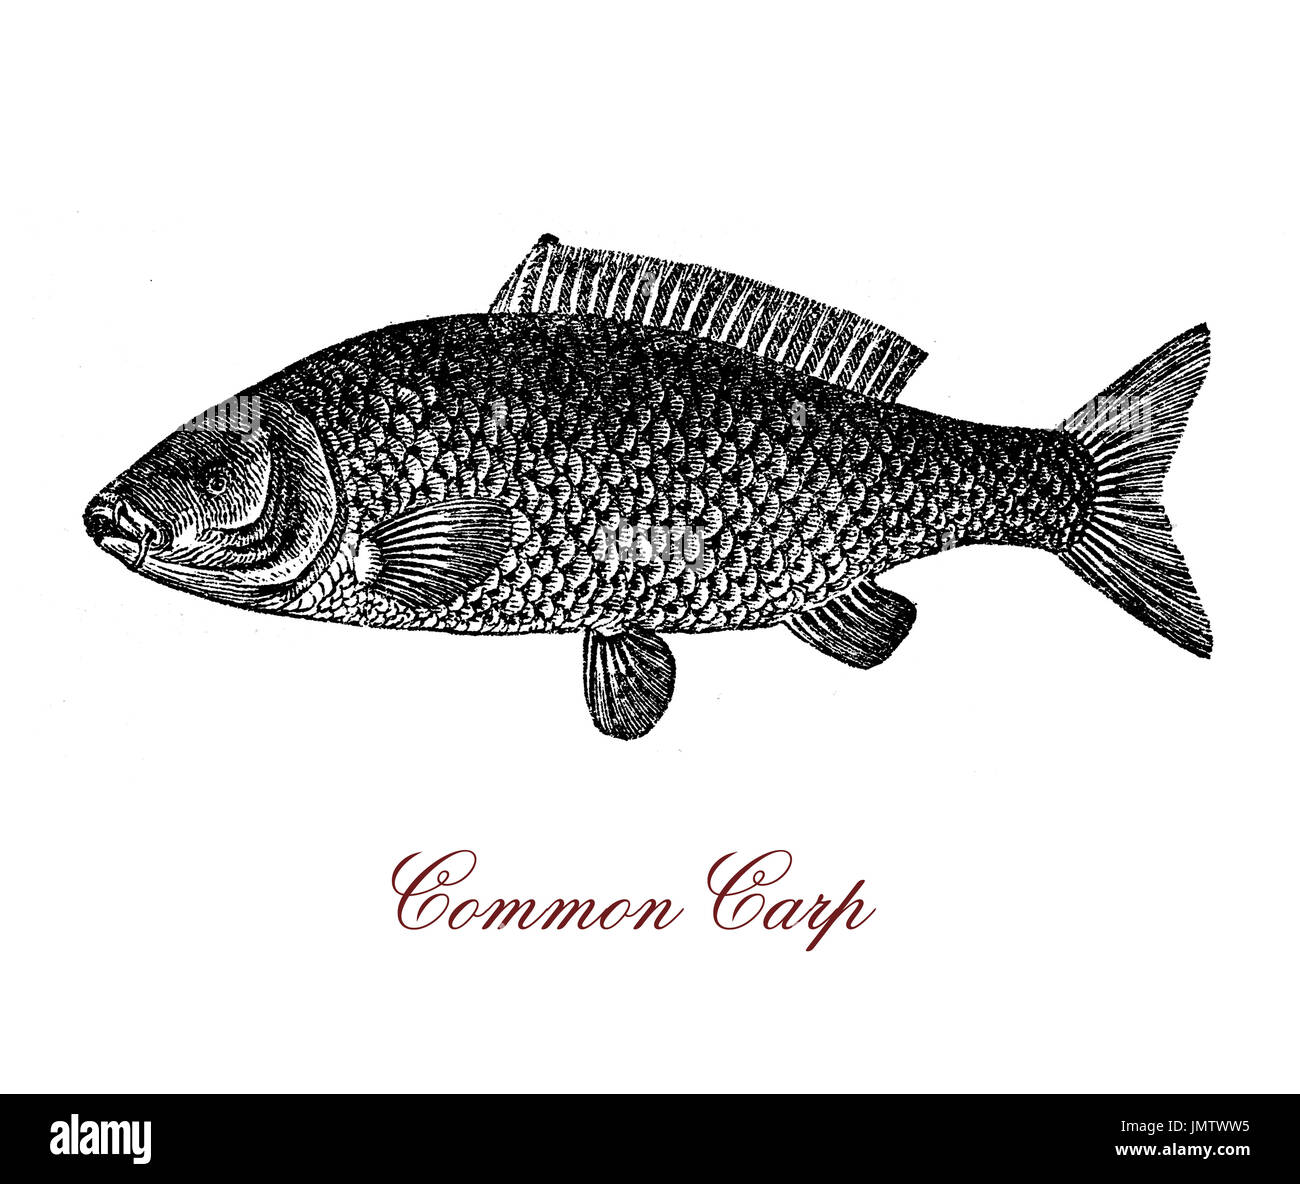 Vintage engraving of common carp, freshwater fish since antiquity important food resource for humans Stock Photo